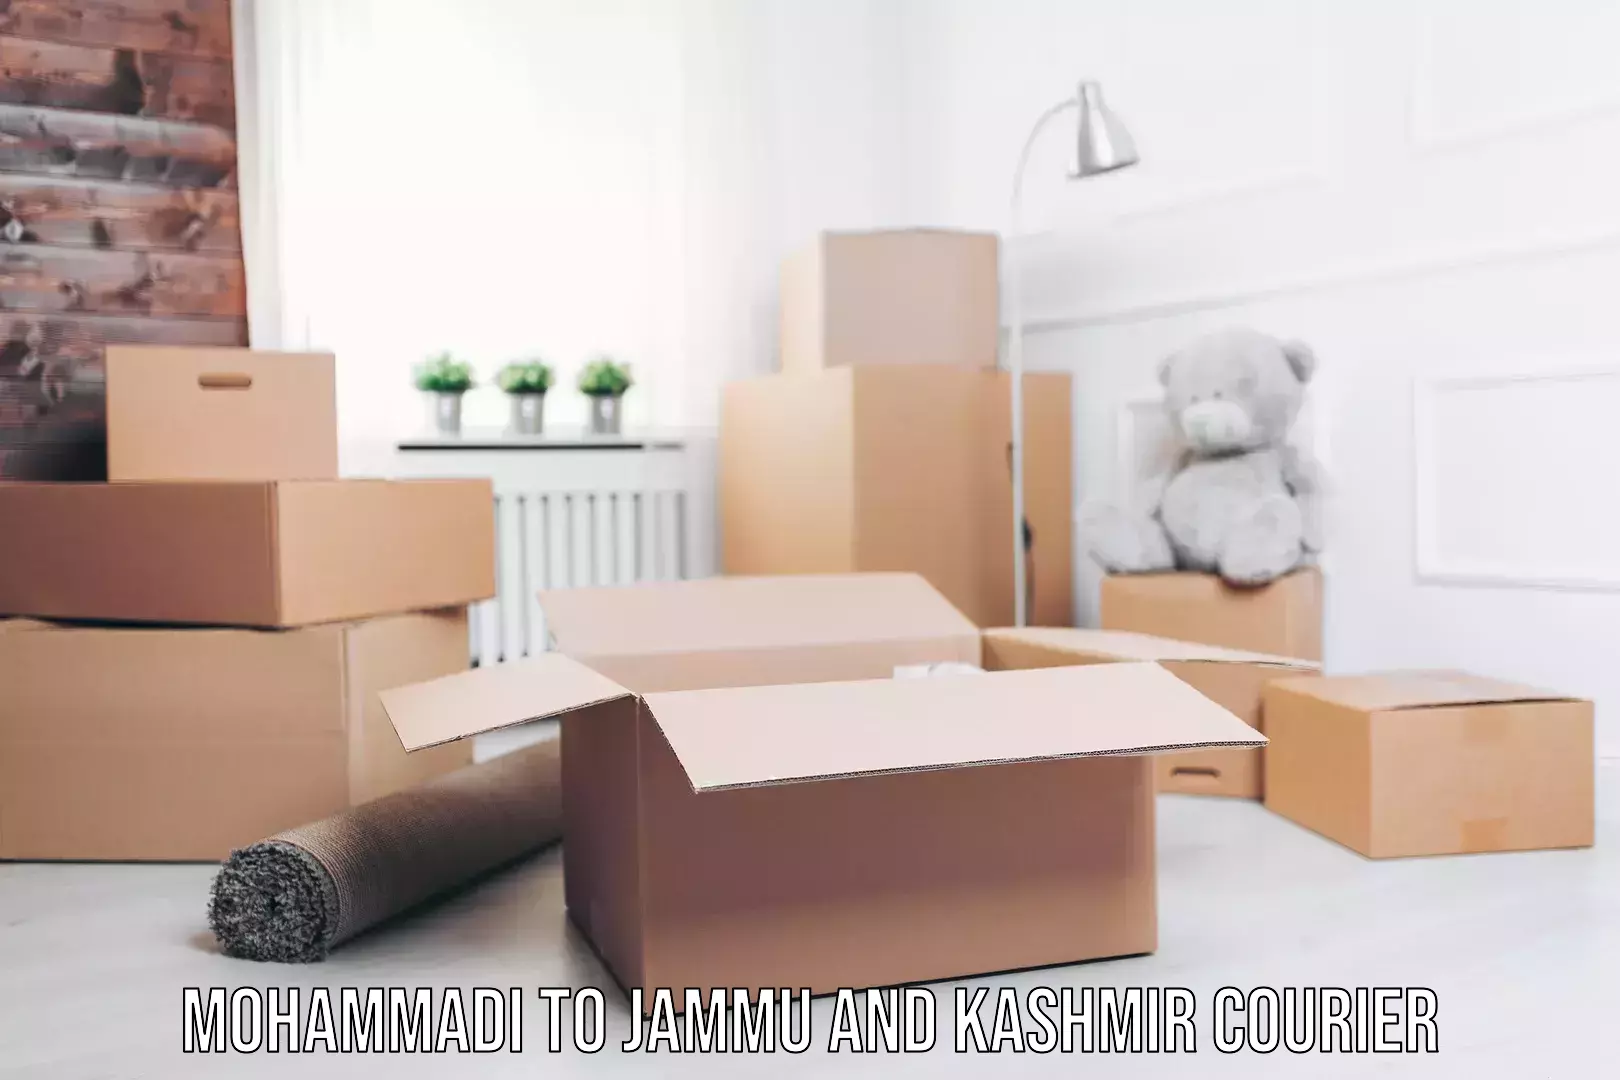 Efficient moving company Mohammadi to Jammu and Kashmir